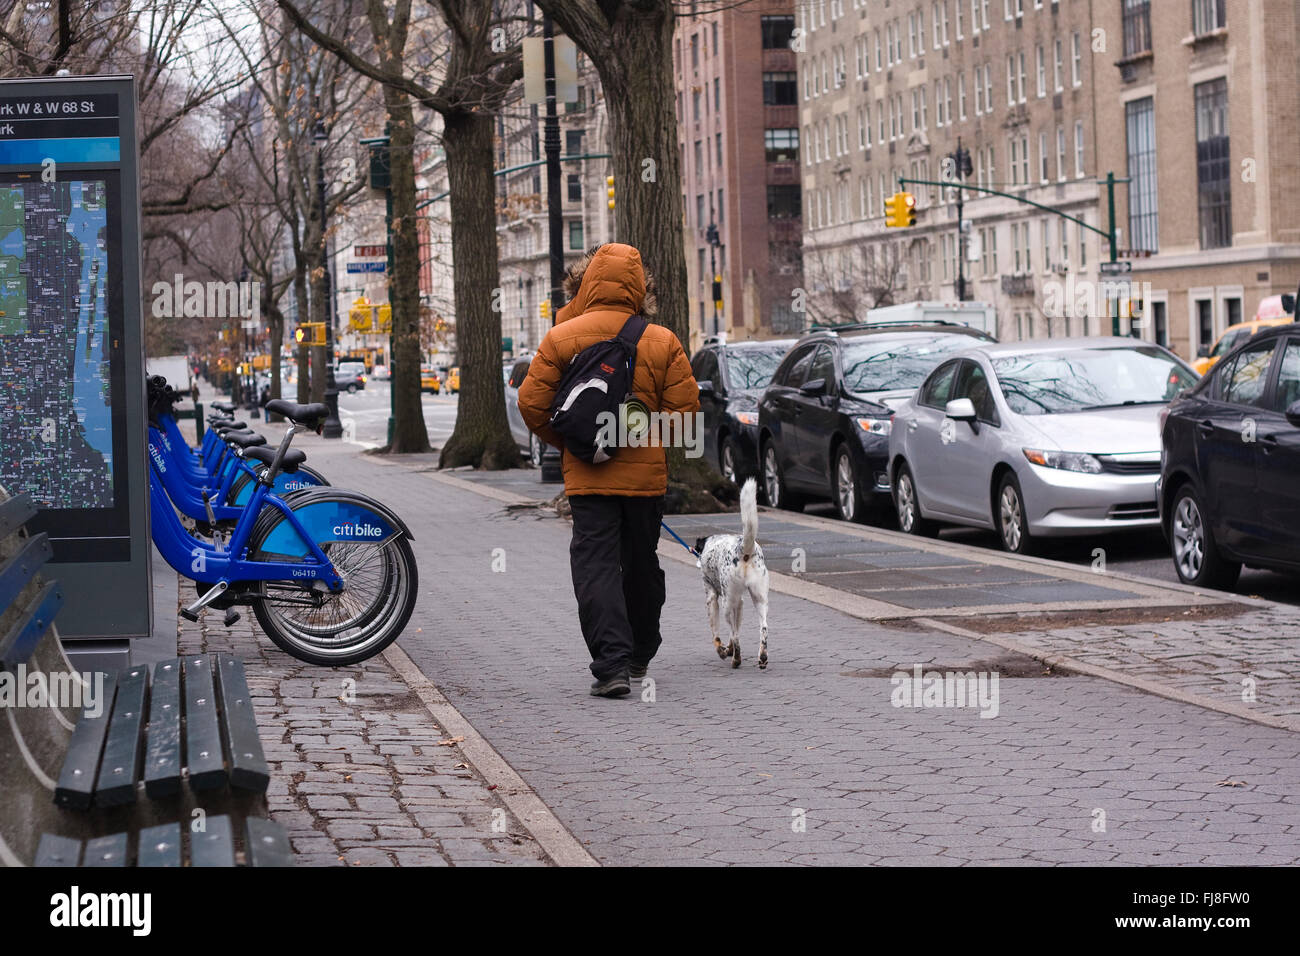 A man on the sidewalk wearing a Winter jacket walks a white spotted dog on a leash in the Upper West Side of Manhattan in NYC Stock Photo